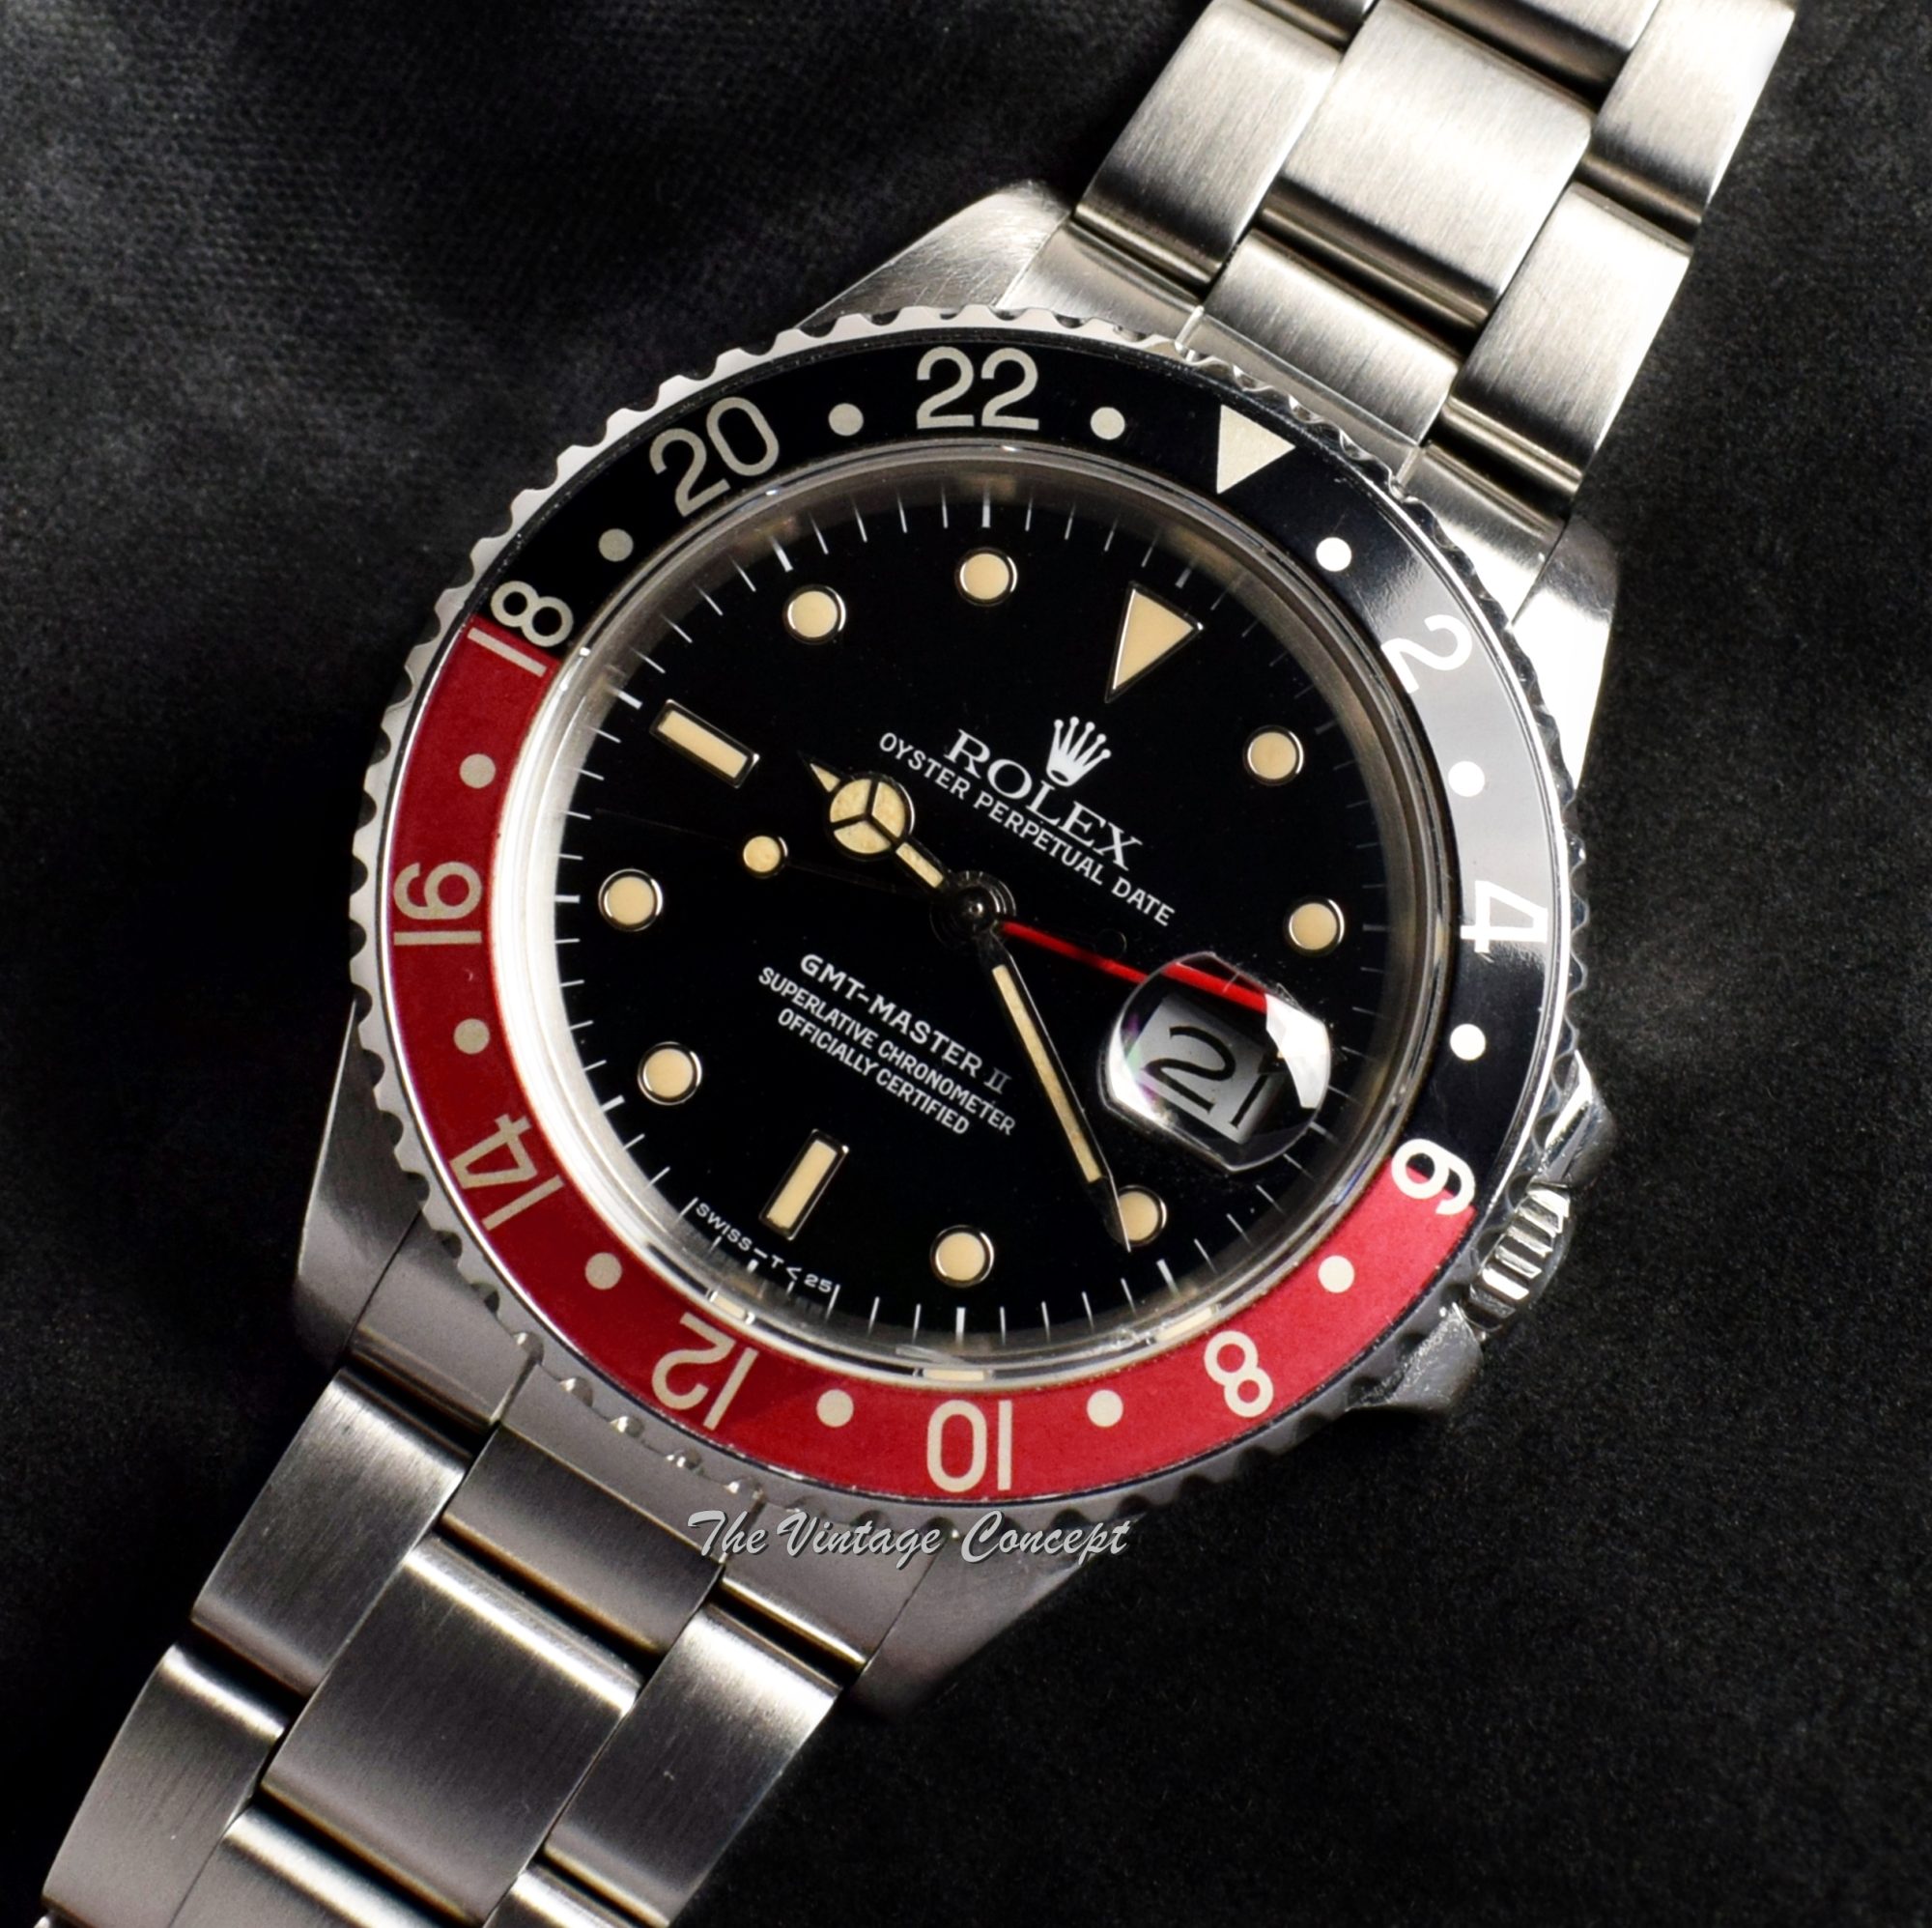 Rolex GMT-Master II Fat Lady Coke 16760 (SOLD) - The Vintage Concept